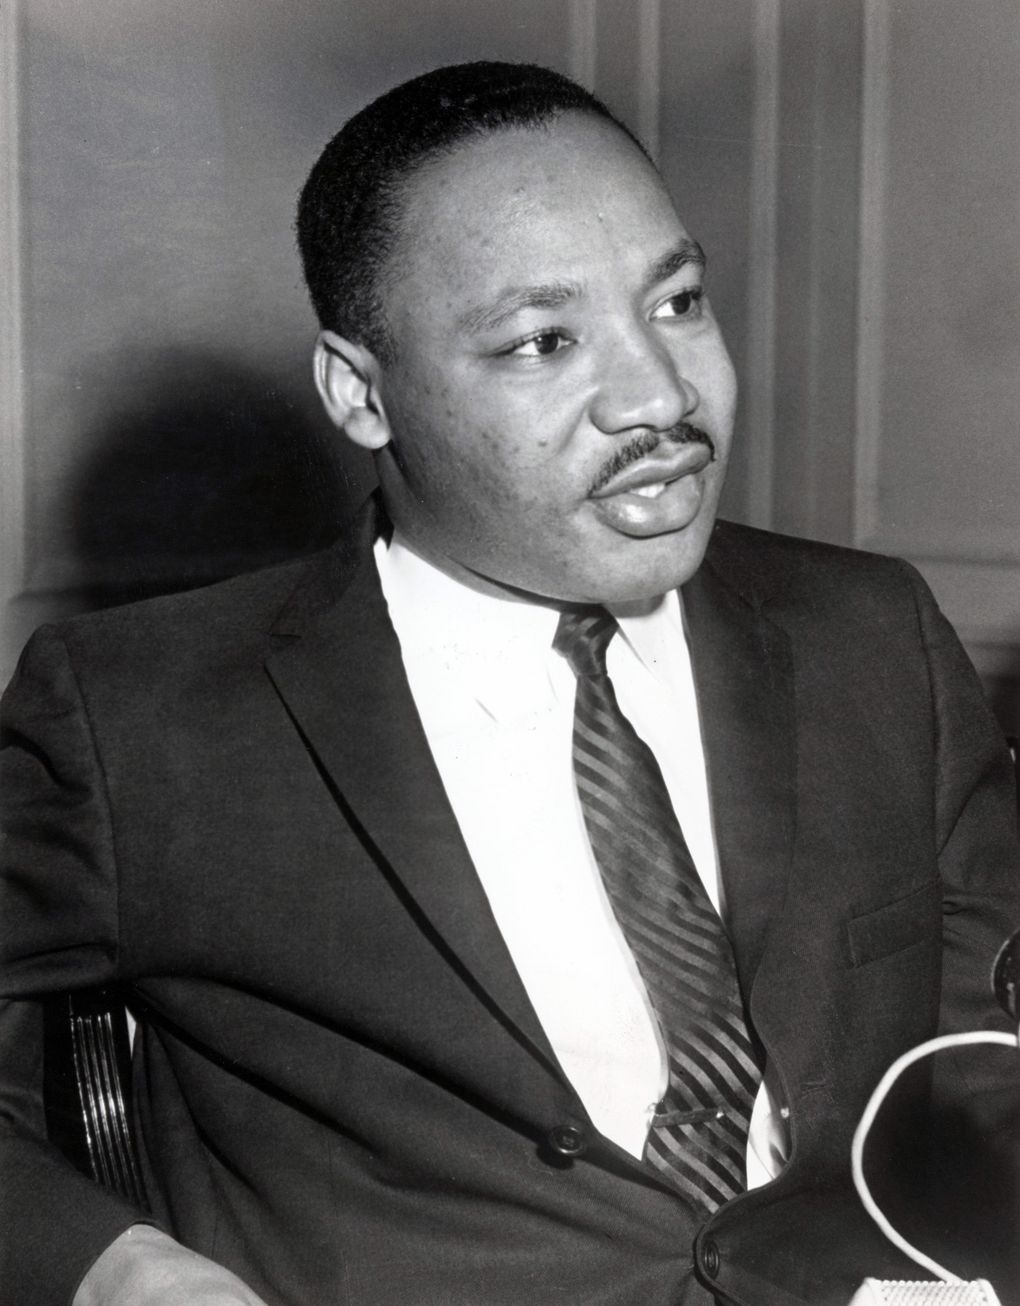 Martin Luther King Jr. | 1956-62 | The Seattle Times